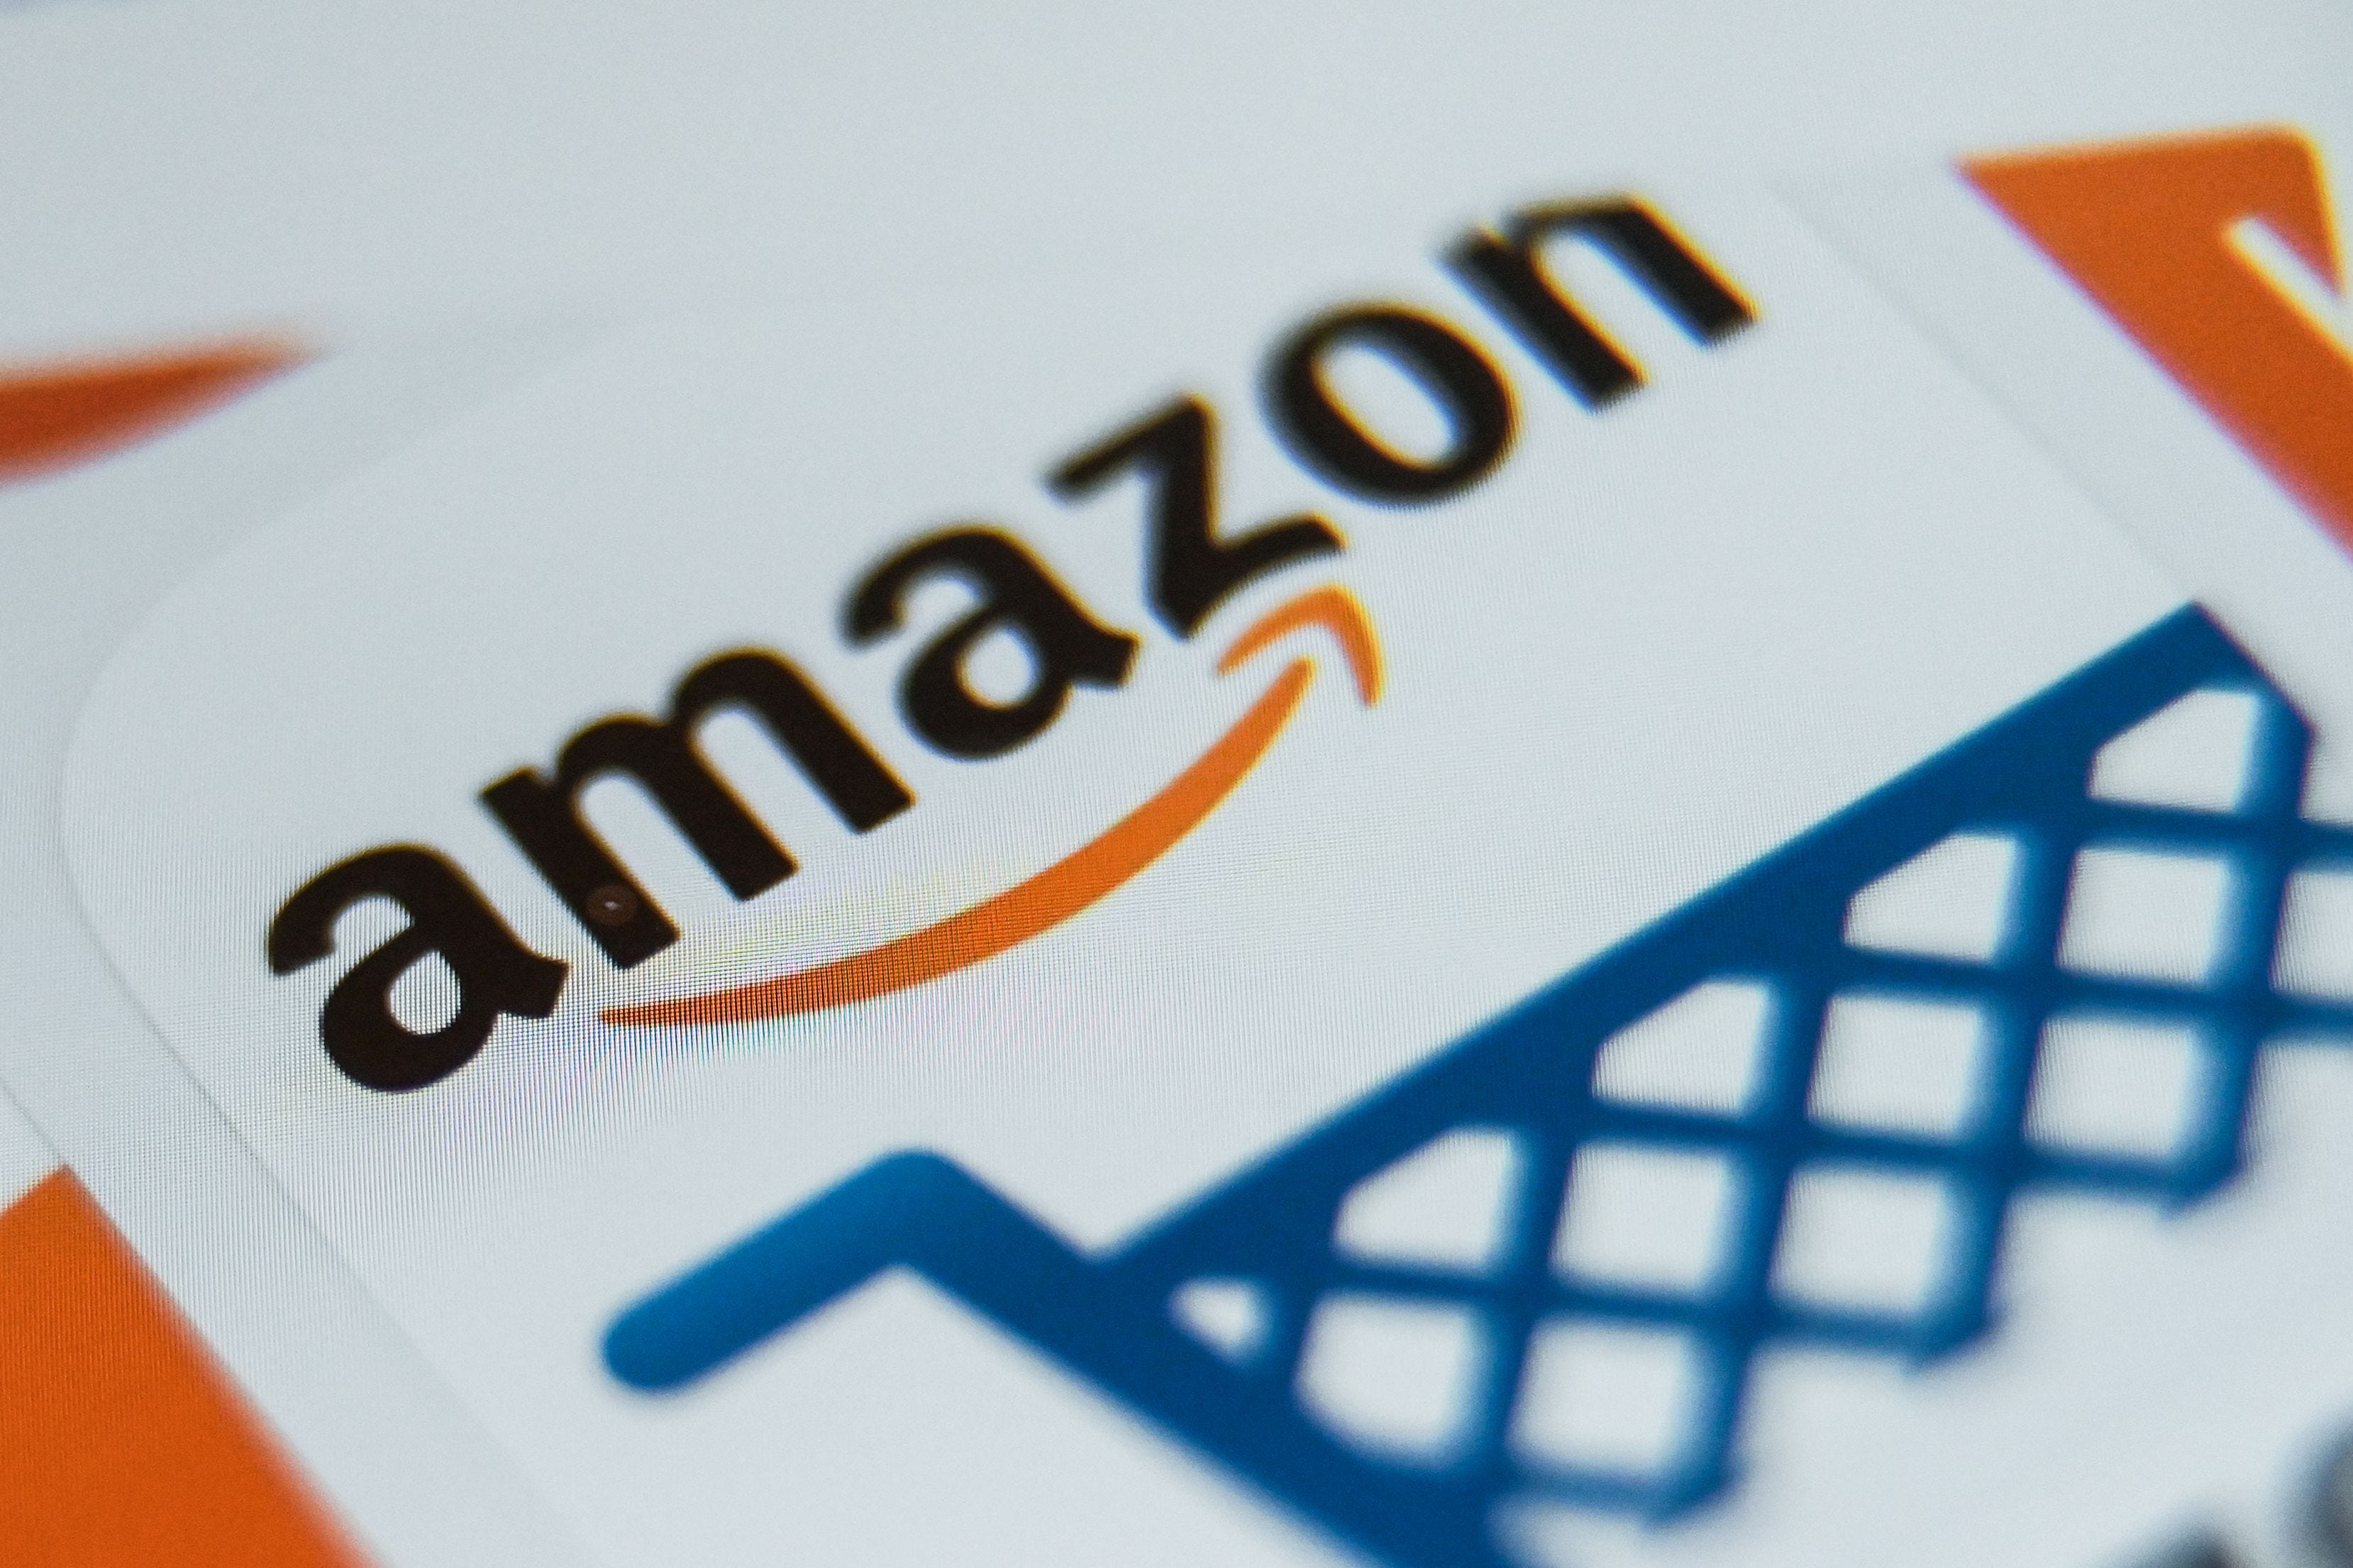 Can you shop online and pay with cash? Amazon says yes